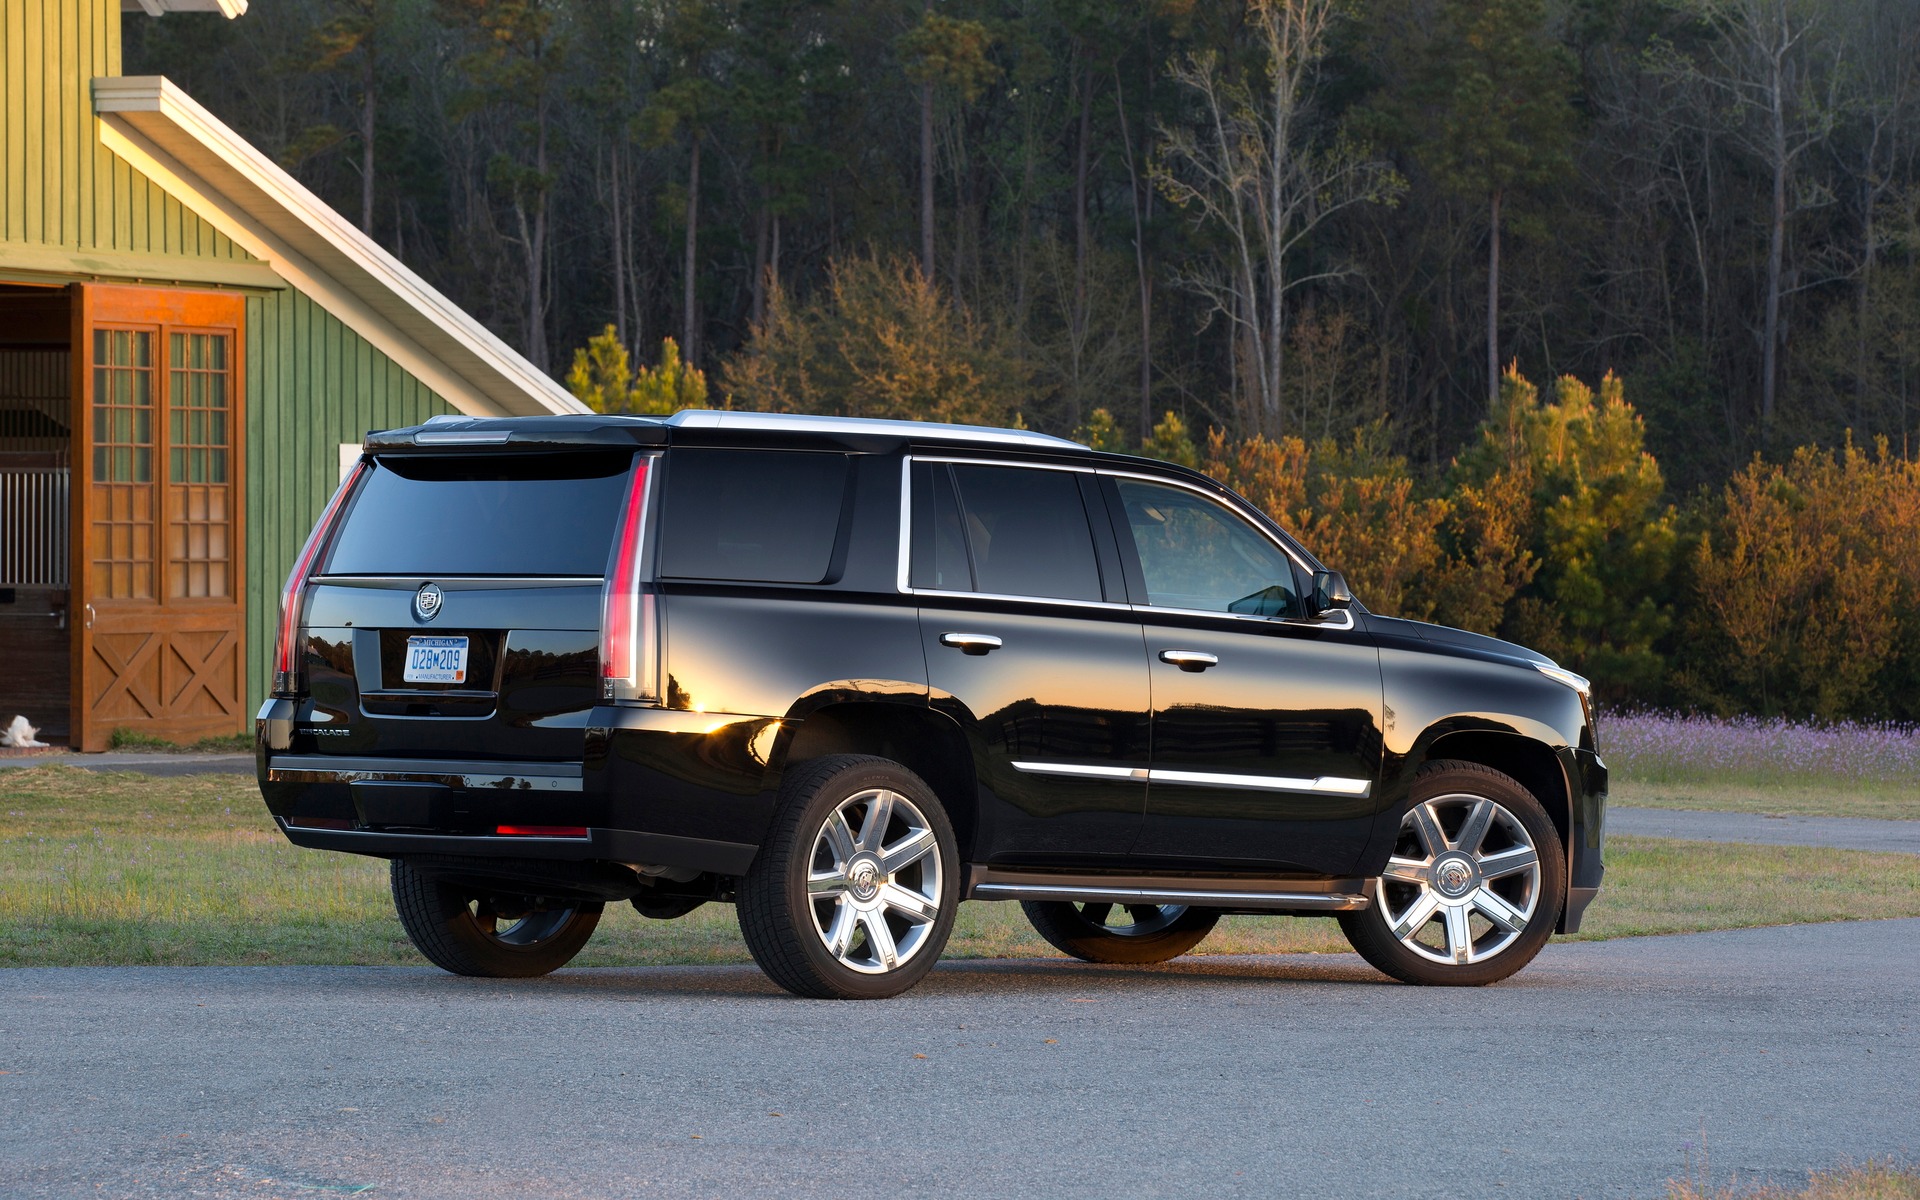 Four-wheel drive is standard with the Escalade.